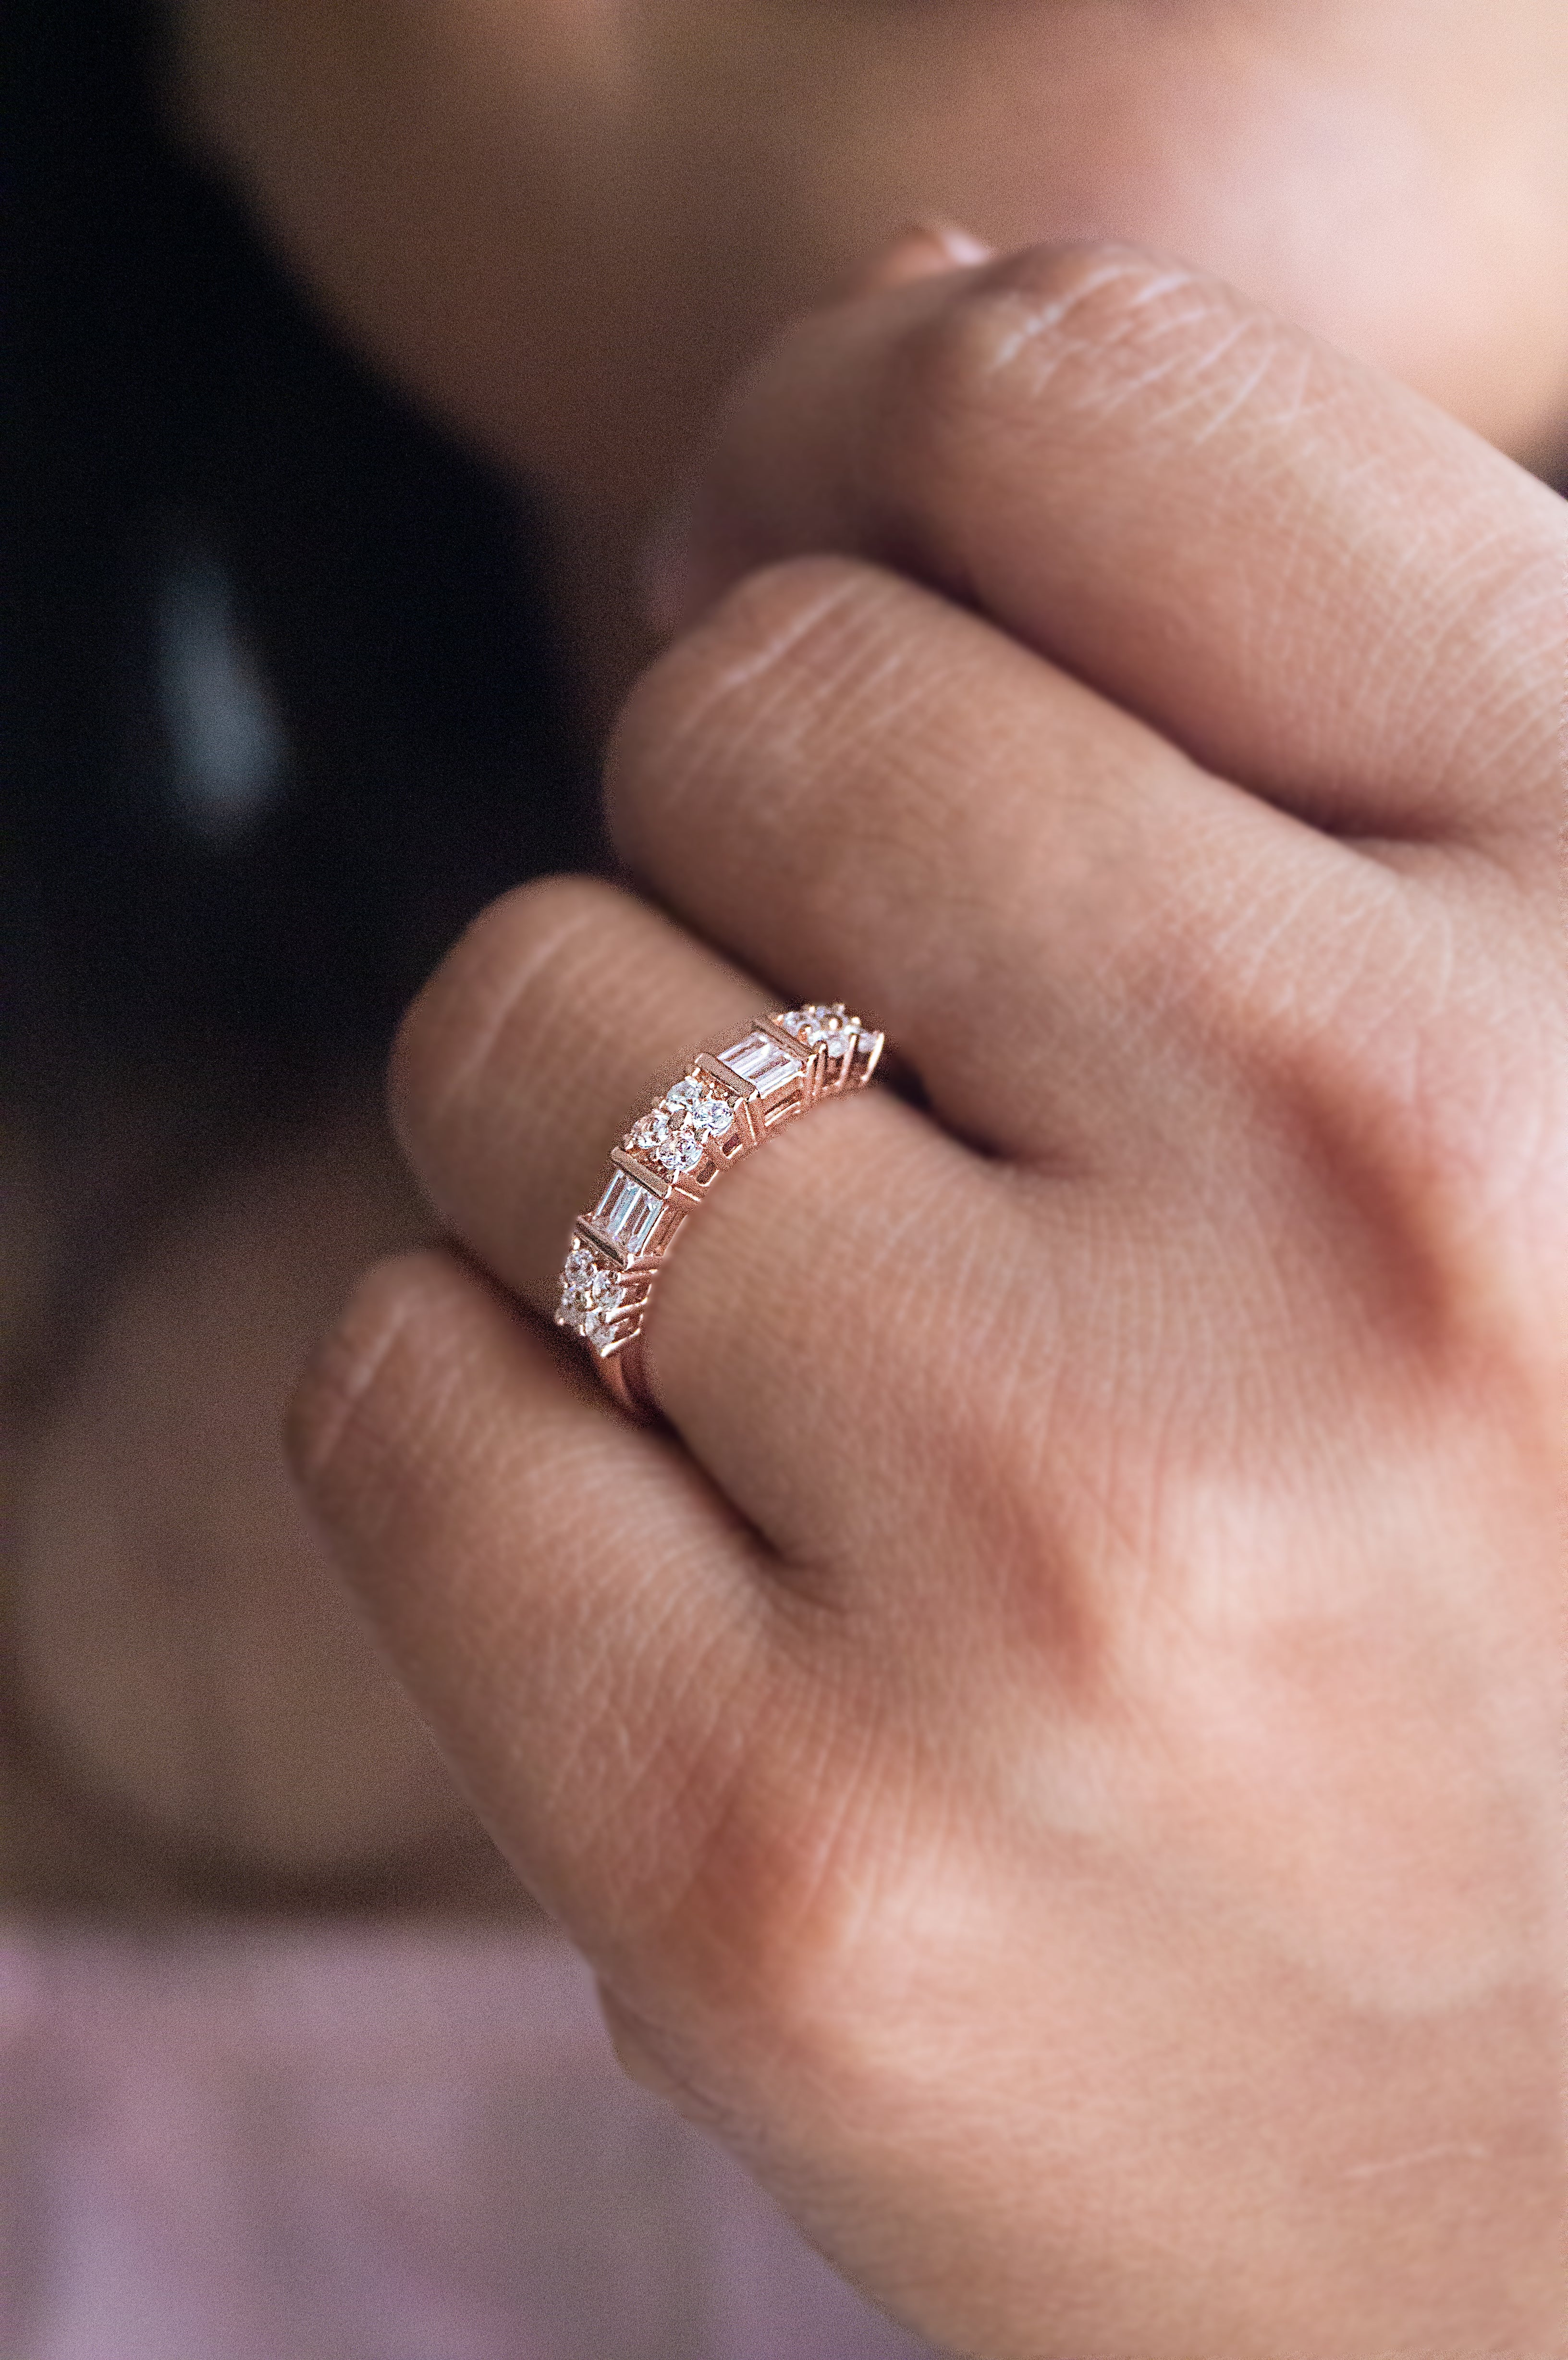 Why Should You Buy a Rose Gold Engagement Ring? from Diamond Heaven